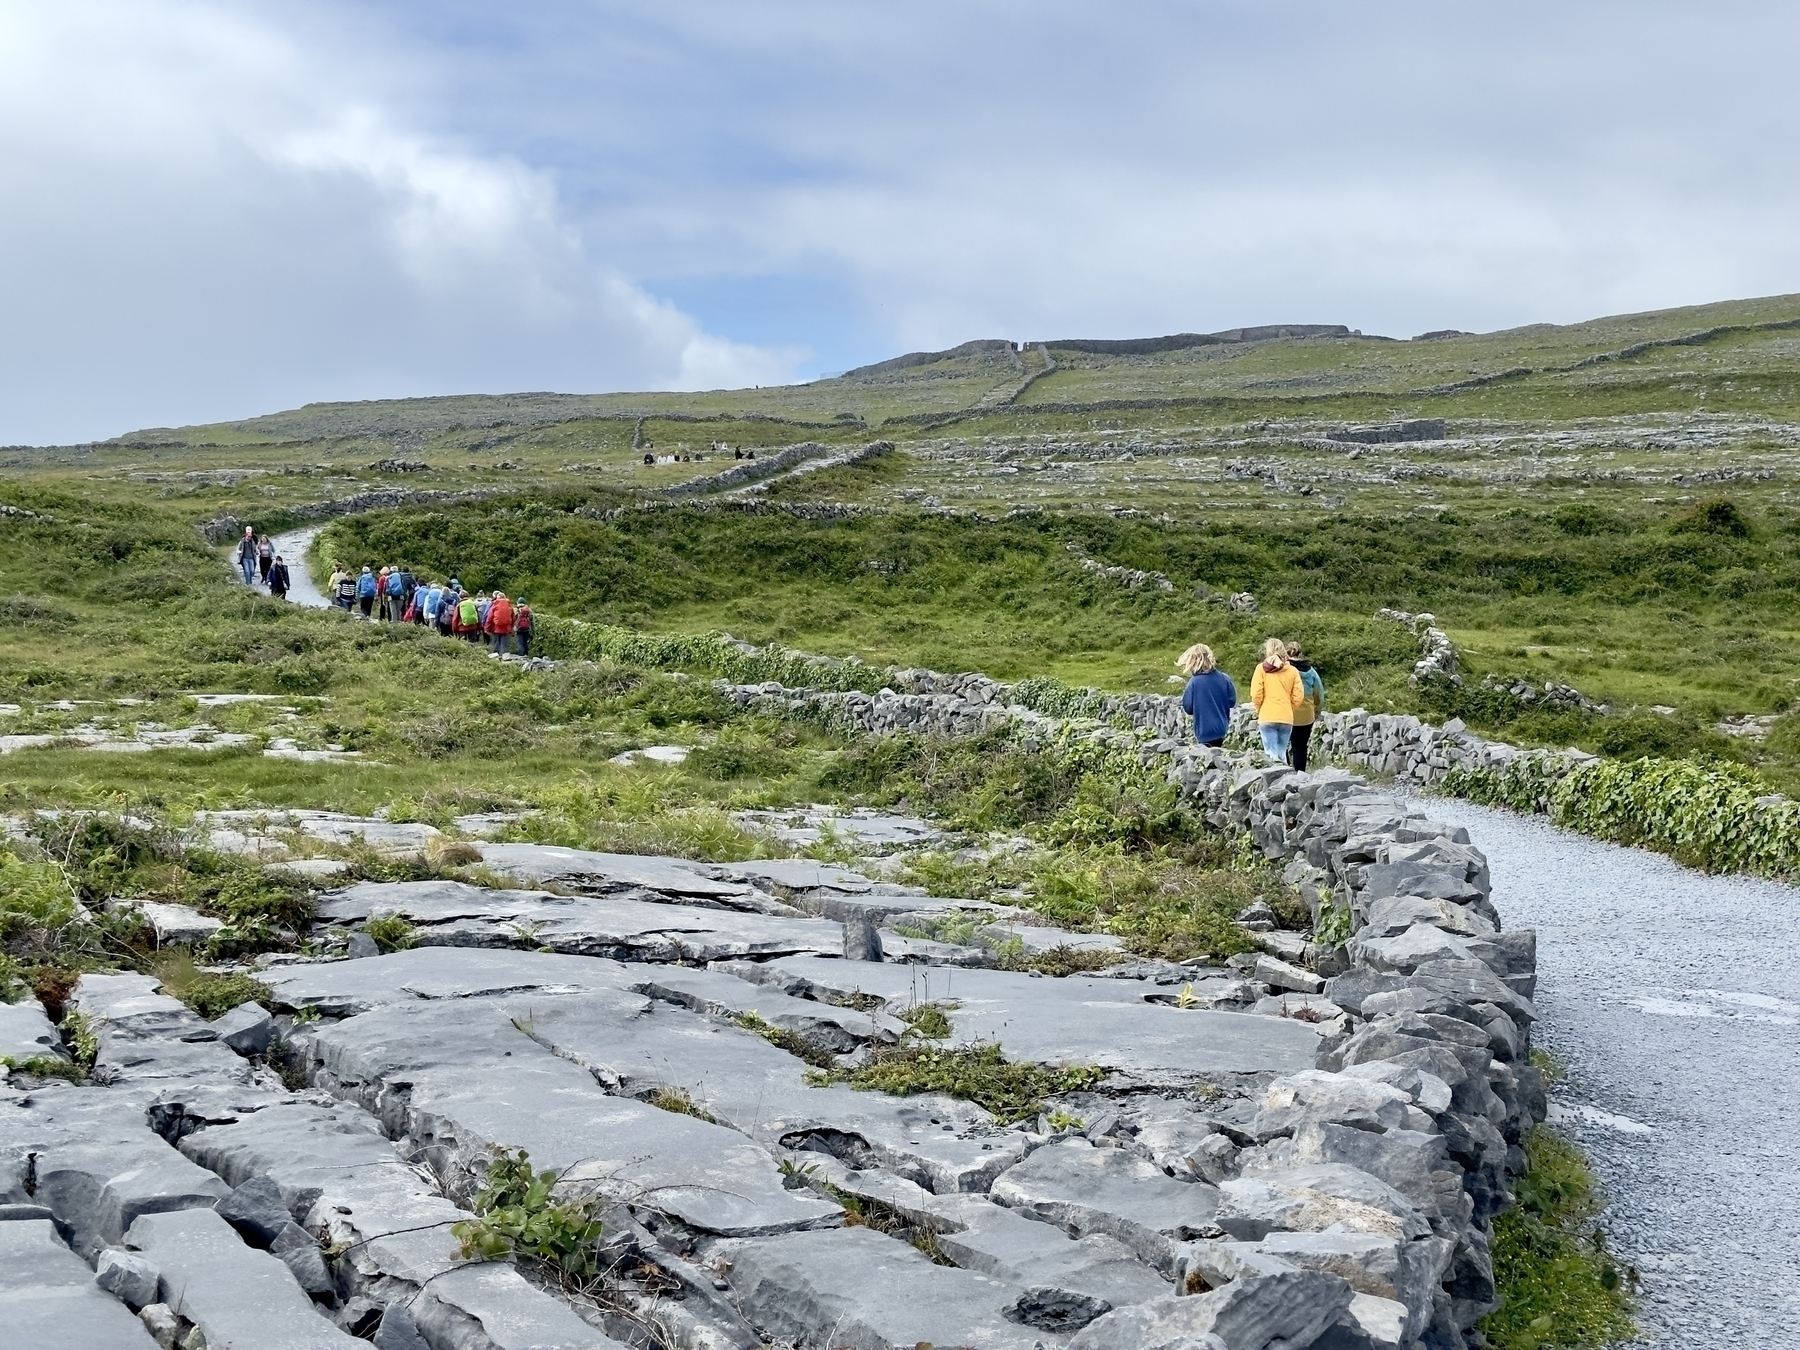 Auto-generated description: A group of people is hiking along a path surrounded by rocky terrain and greenery under a cloudy sky.